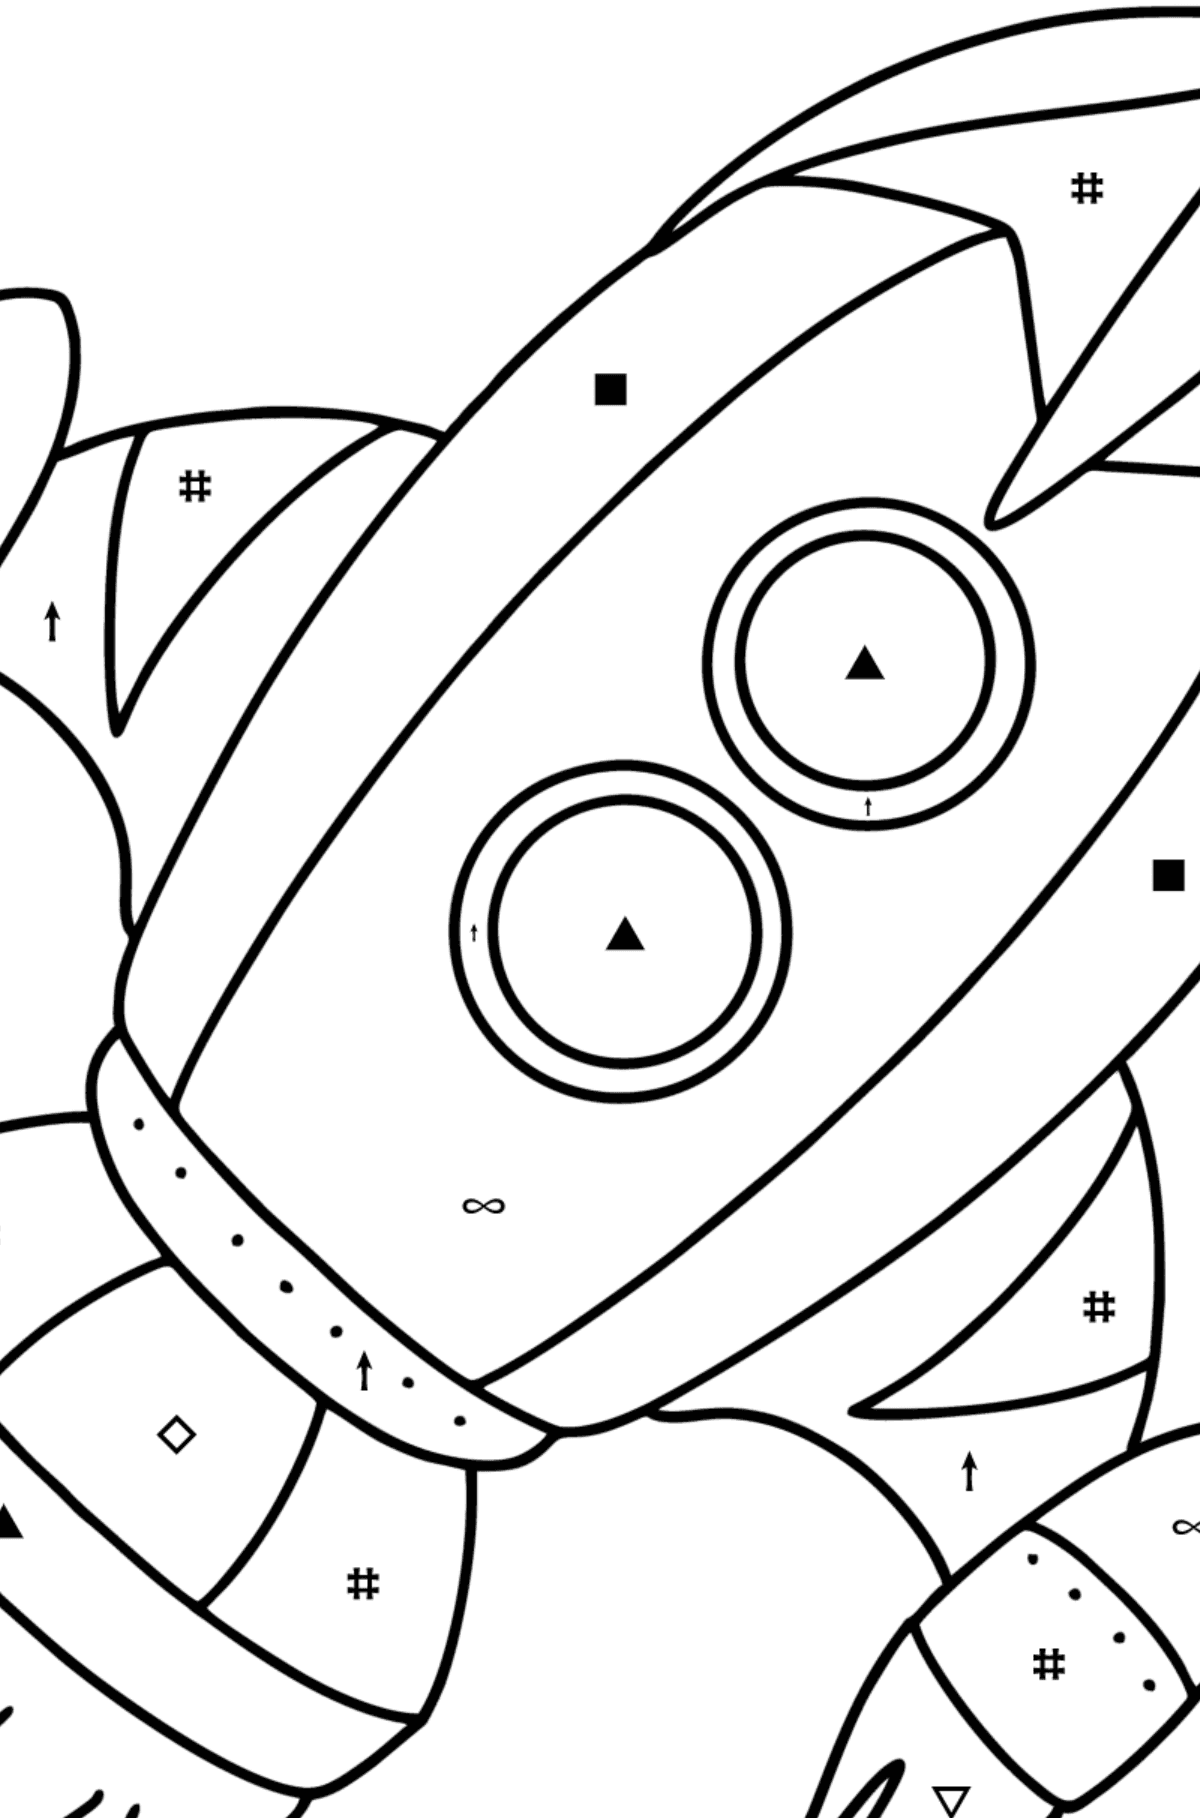 Cartoon rocket coloring page - Coloring by Symbols for Kids